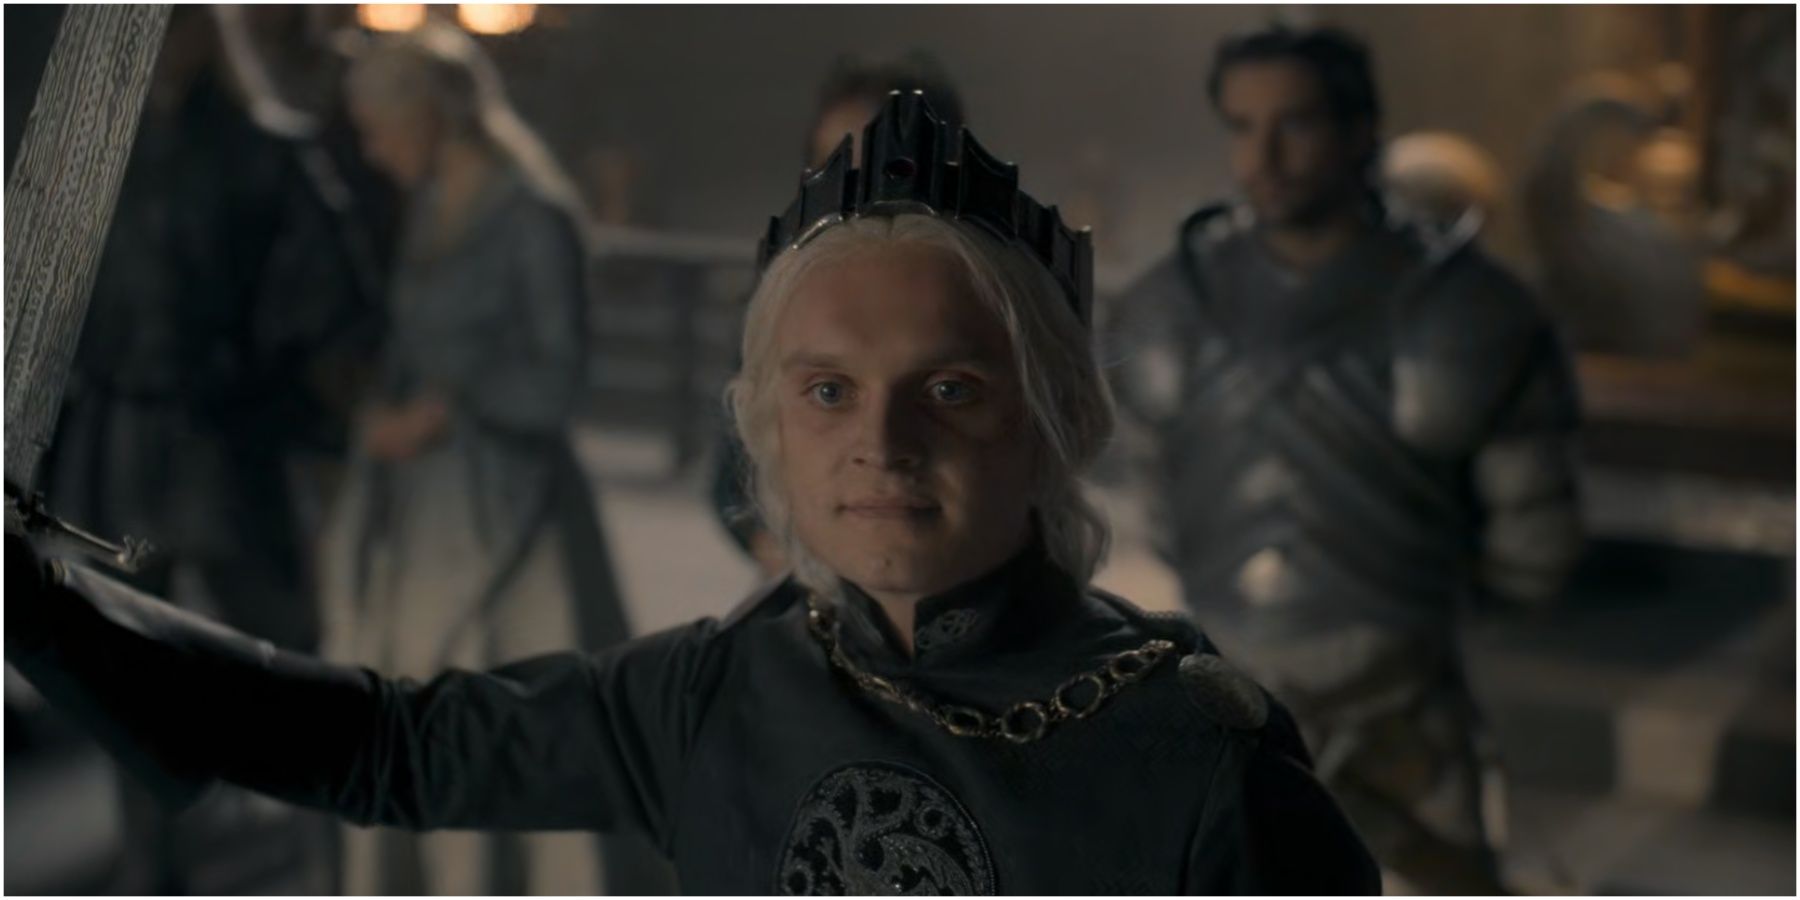 Aegon II Targaryen holds Blackfyre and wears the Conqueror's crown in House of the Dragon.